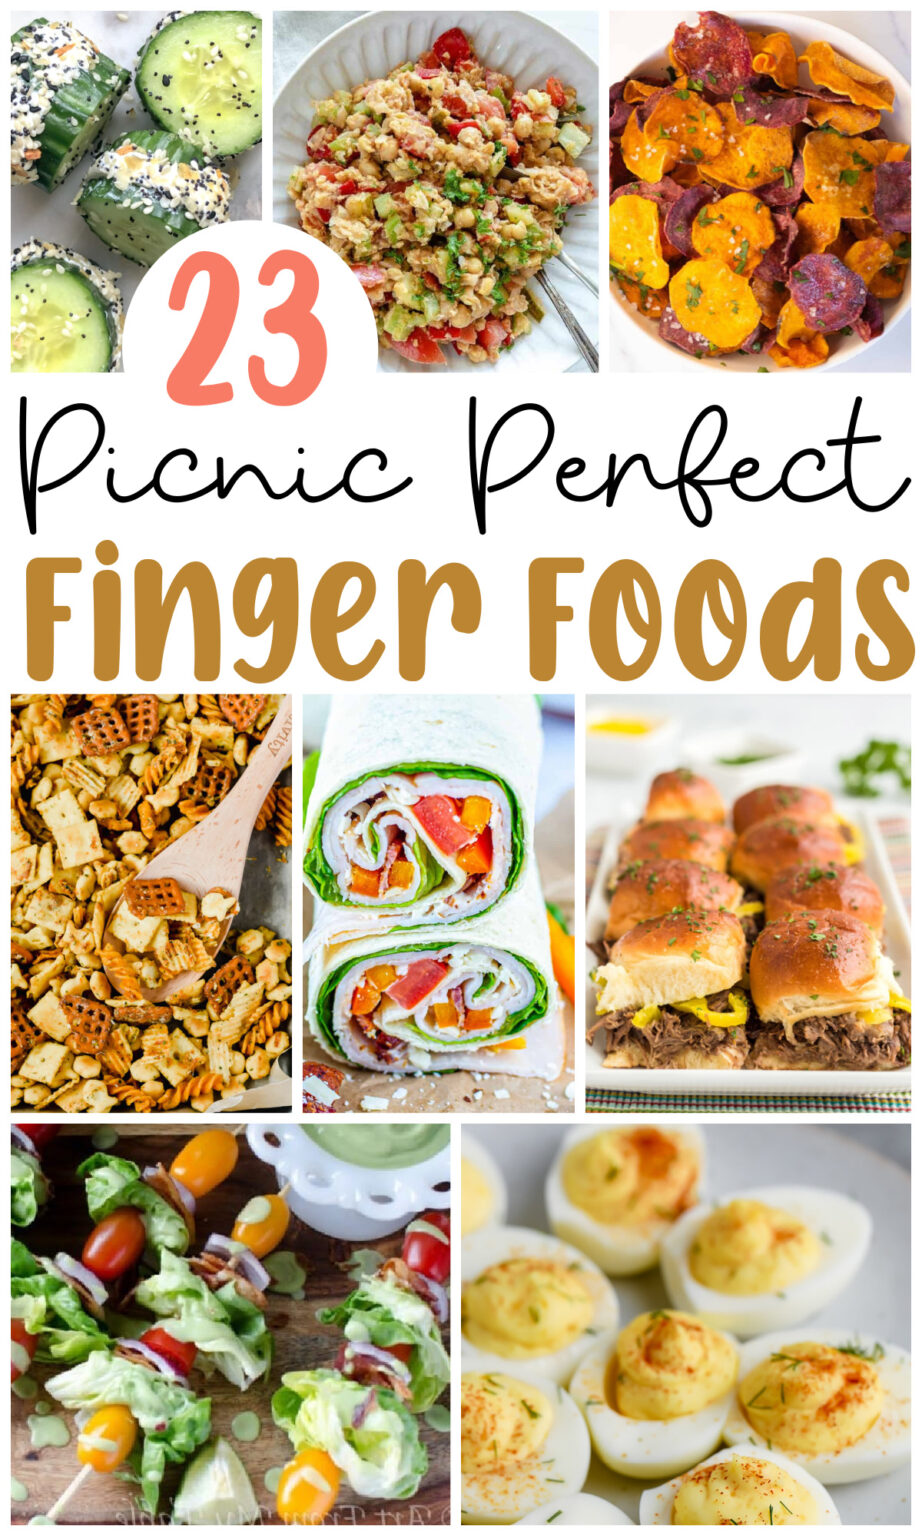 25 Delicious Picnic Finger Foods for Kids and Adults - Natural Beach Living